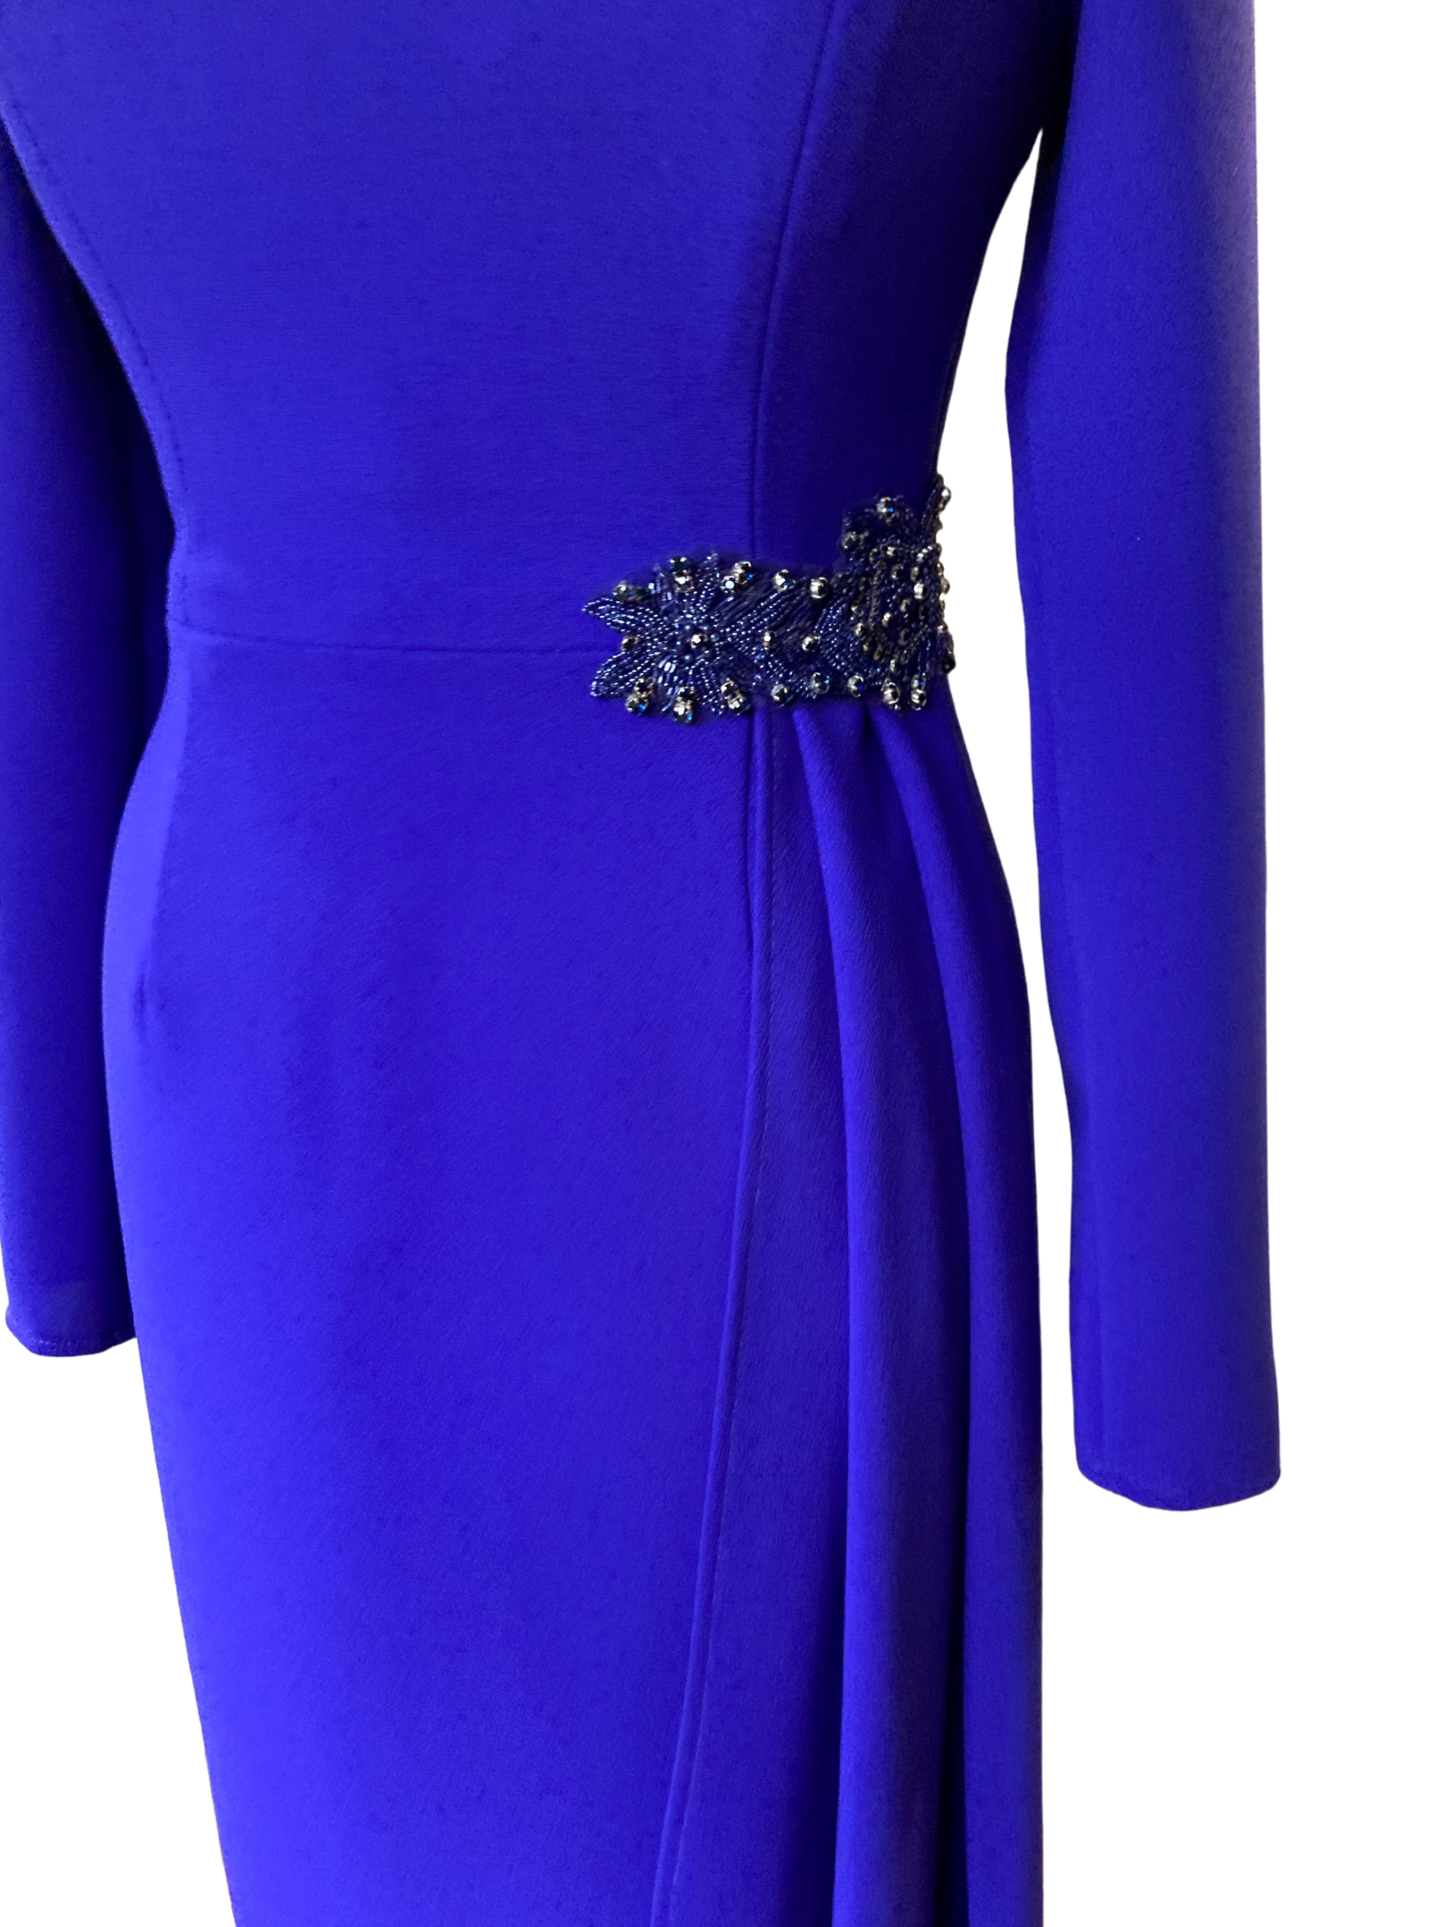 Sarah Side Drape in Byzantine Purple colour. This dress is a Classic and Elegant, tailored Dress, ideal for a mother of the Bride/Groom. Simple sleeve and neckline with a flattering side drape anchored with a Jewelled applique.